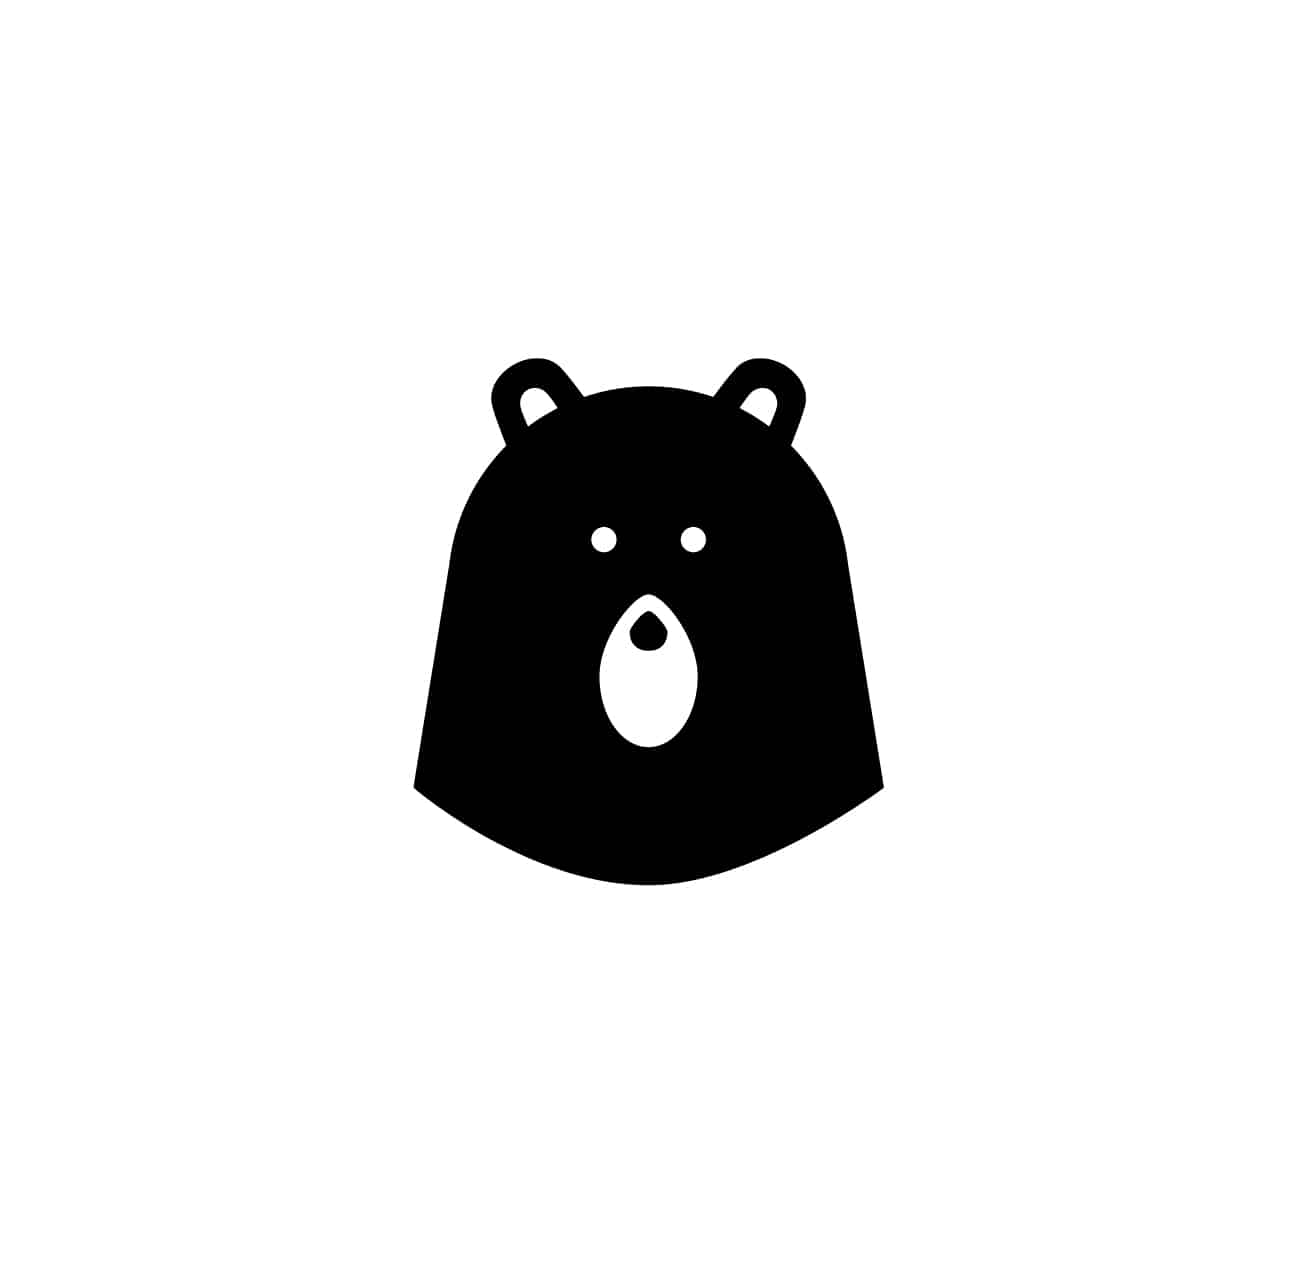 The Hot Bear Logo Designed of a Bear by Stellen Design Branding and Logo Design in Los Angeles CA